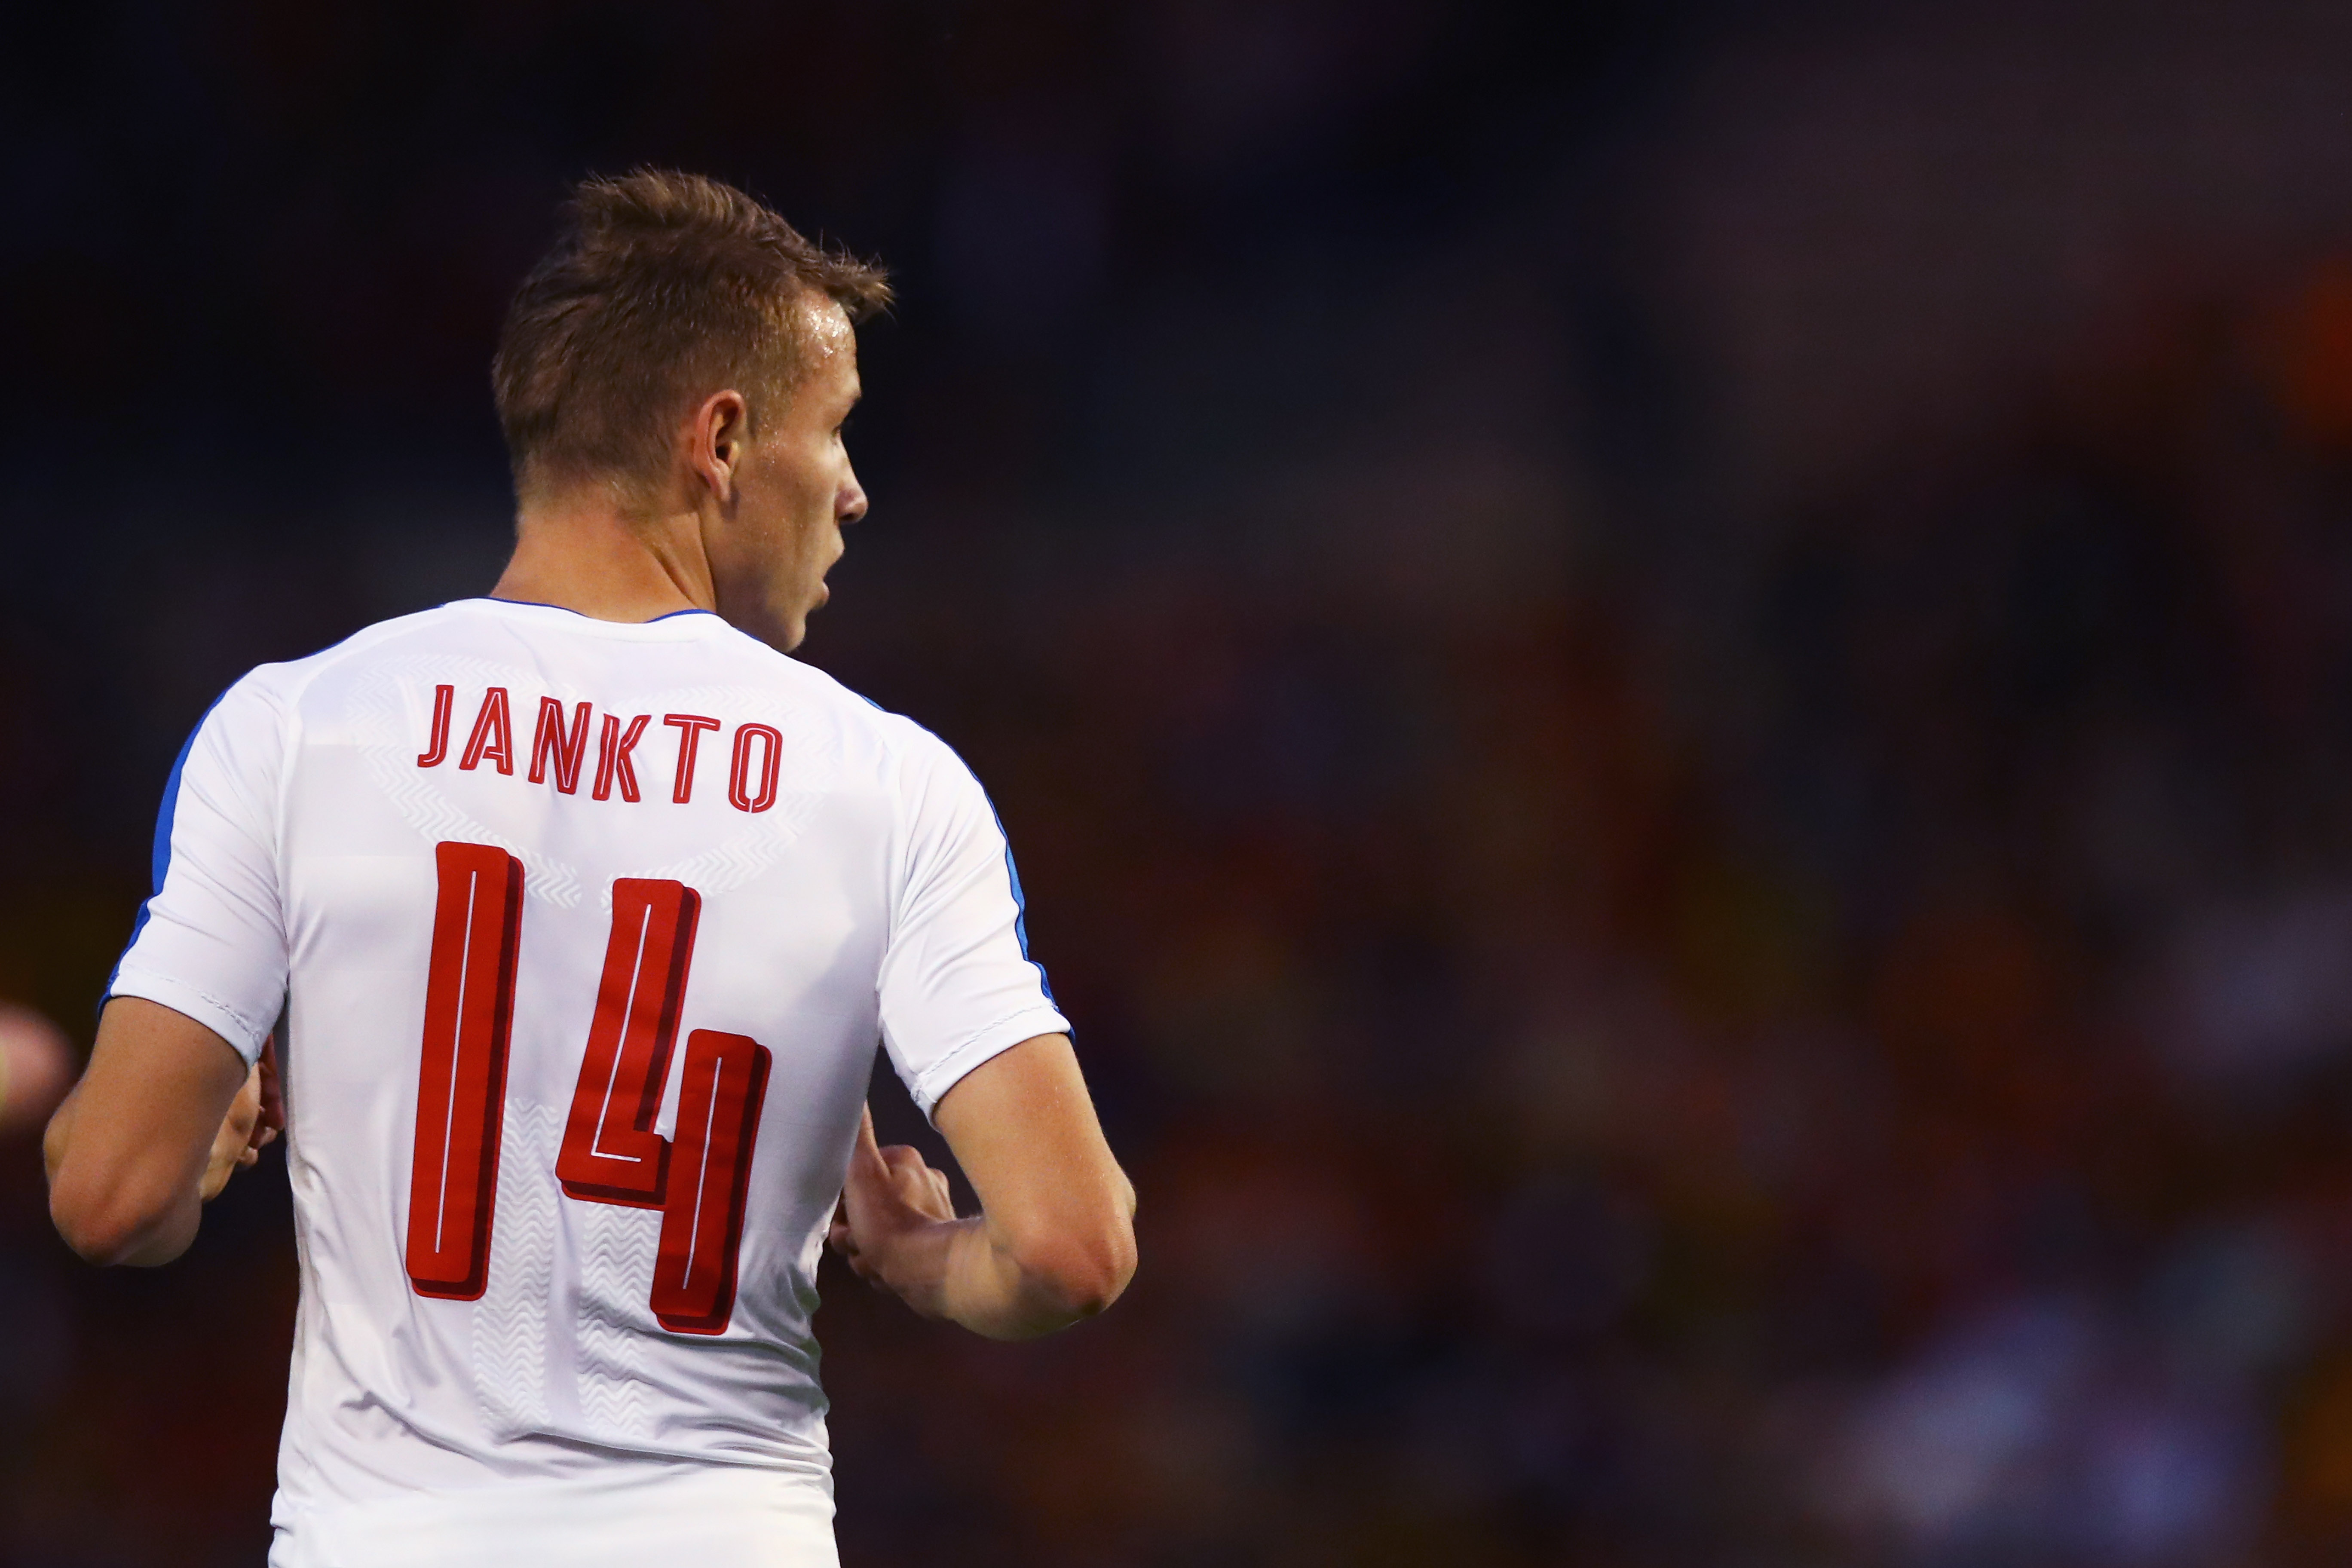 BRUSSELS, BELGIUM - JUNE 05:  Jakub Jankto of the Czech Republic in action during the International Friendly match between Belgium and Czech Republic at Stade Roi Baudouis on June 5, 2017 in Brussels, Belgium.  (Photo by Dean Mouhtaropoulos/Getty Images)